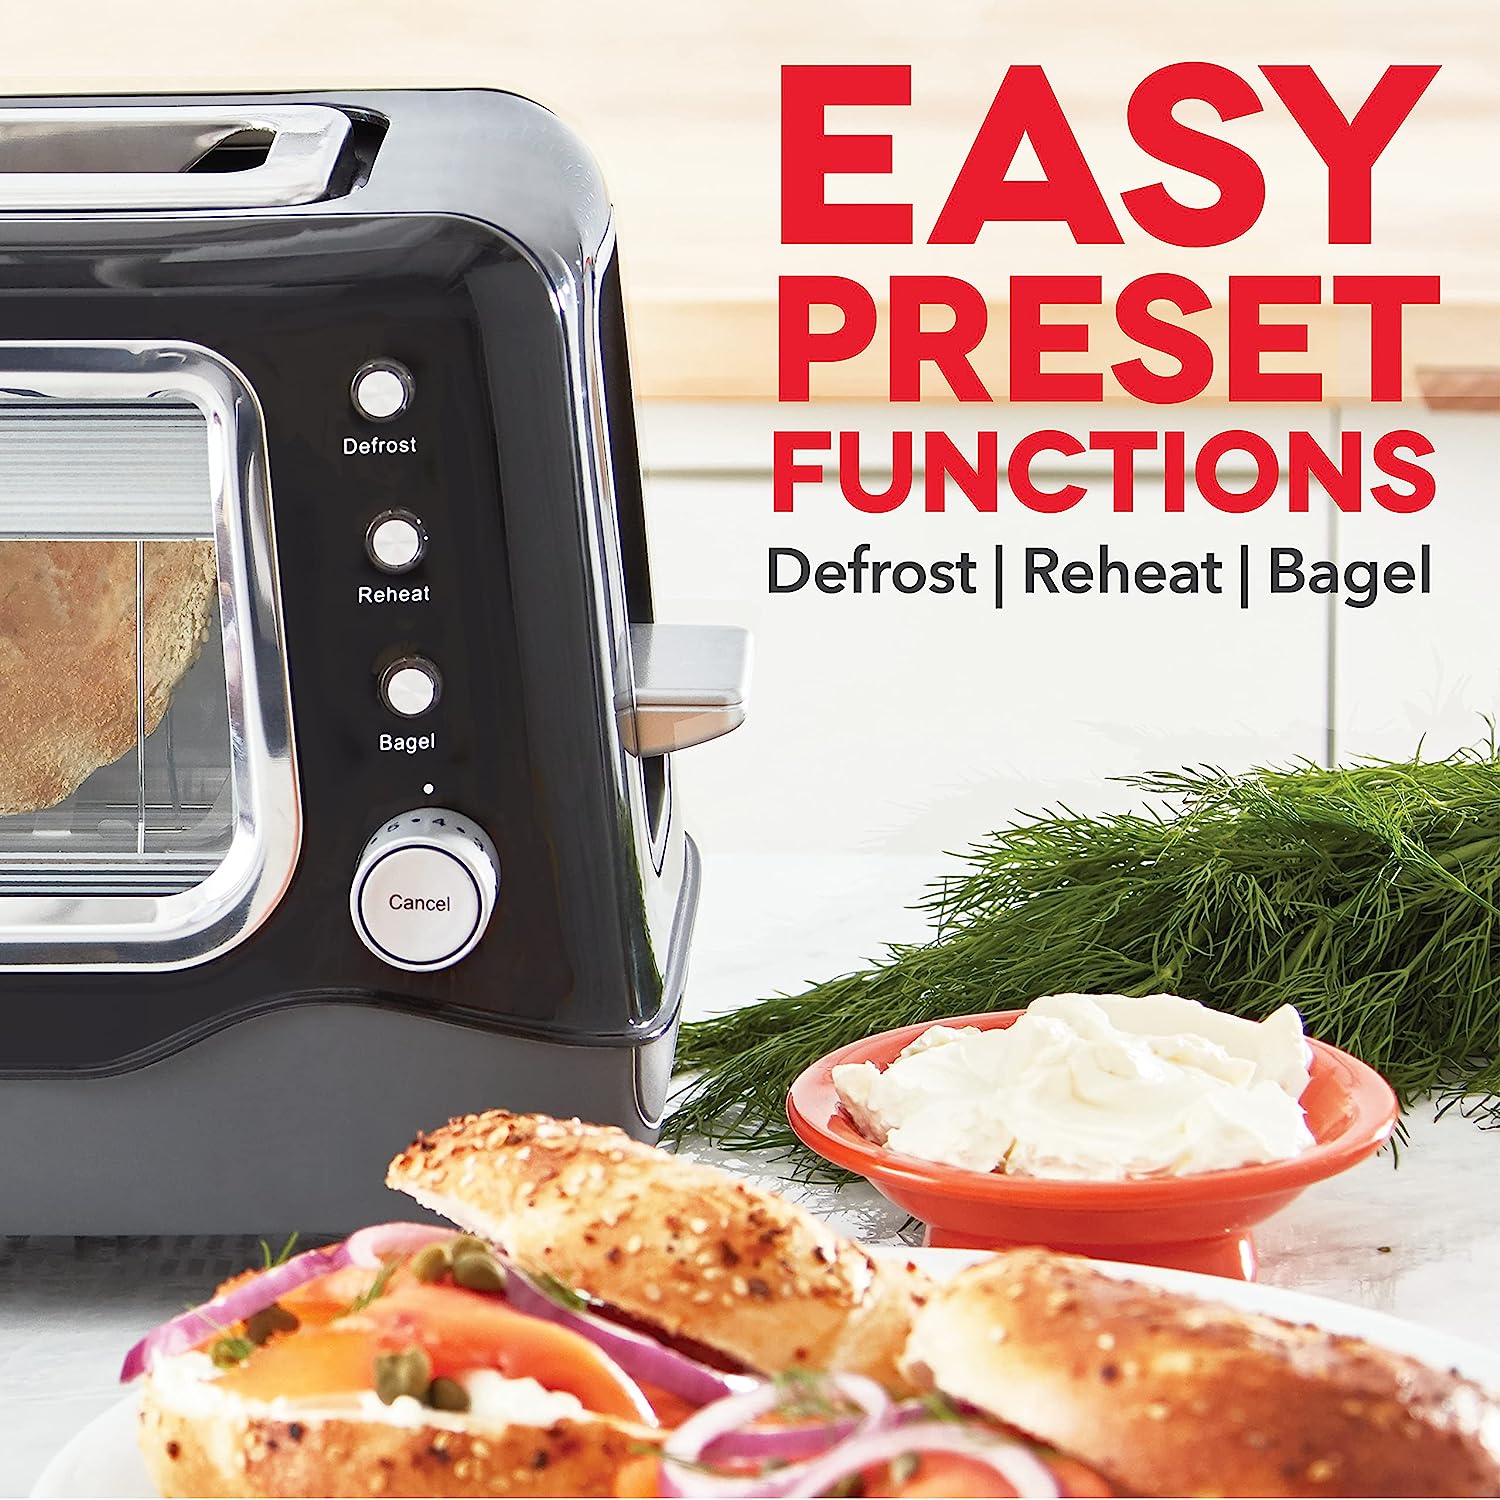 A black toaster with a glass window plus some toasted bagels. The headline reads, 'Easy preset functions, defrost, reheat, bagel.'